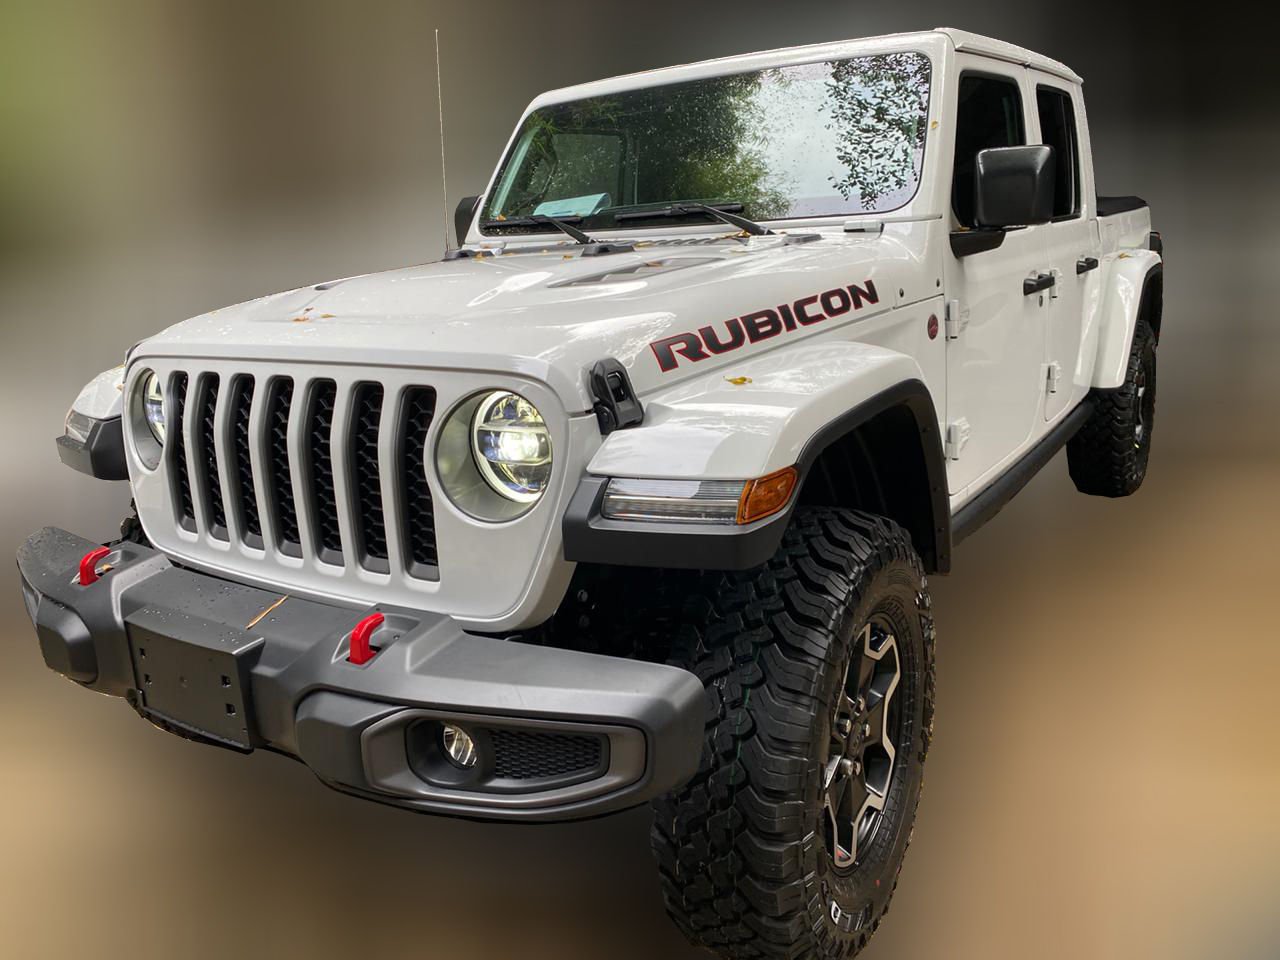 Used & 2nd hand Jeep Wrangler for Sale in Philippines